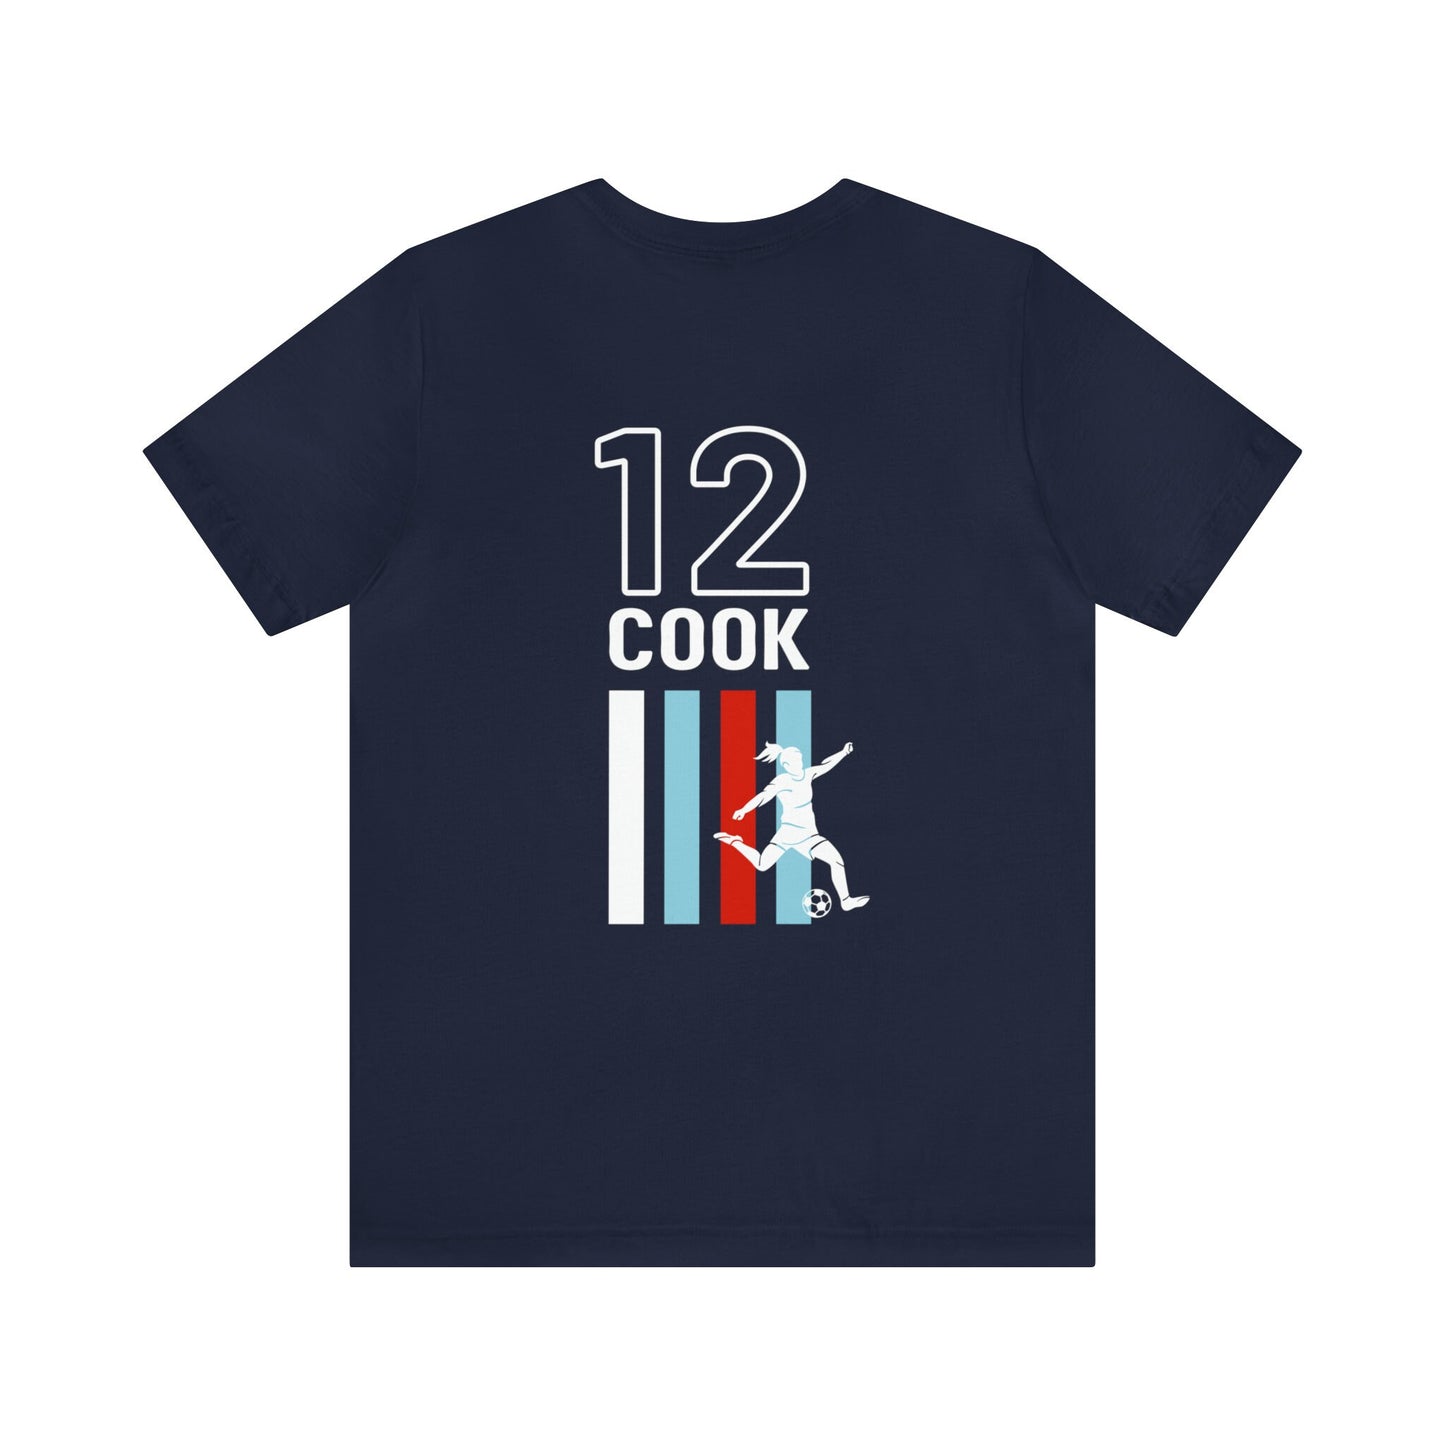 Alana Cook US Women's World Cup Supporter T-shirt, All Players Available, USWNT Shirt, FIFA Soccer, #webelieve, Front & Back Print